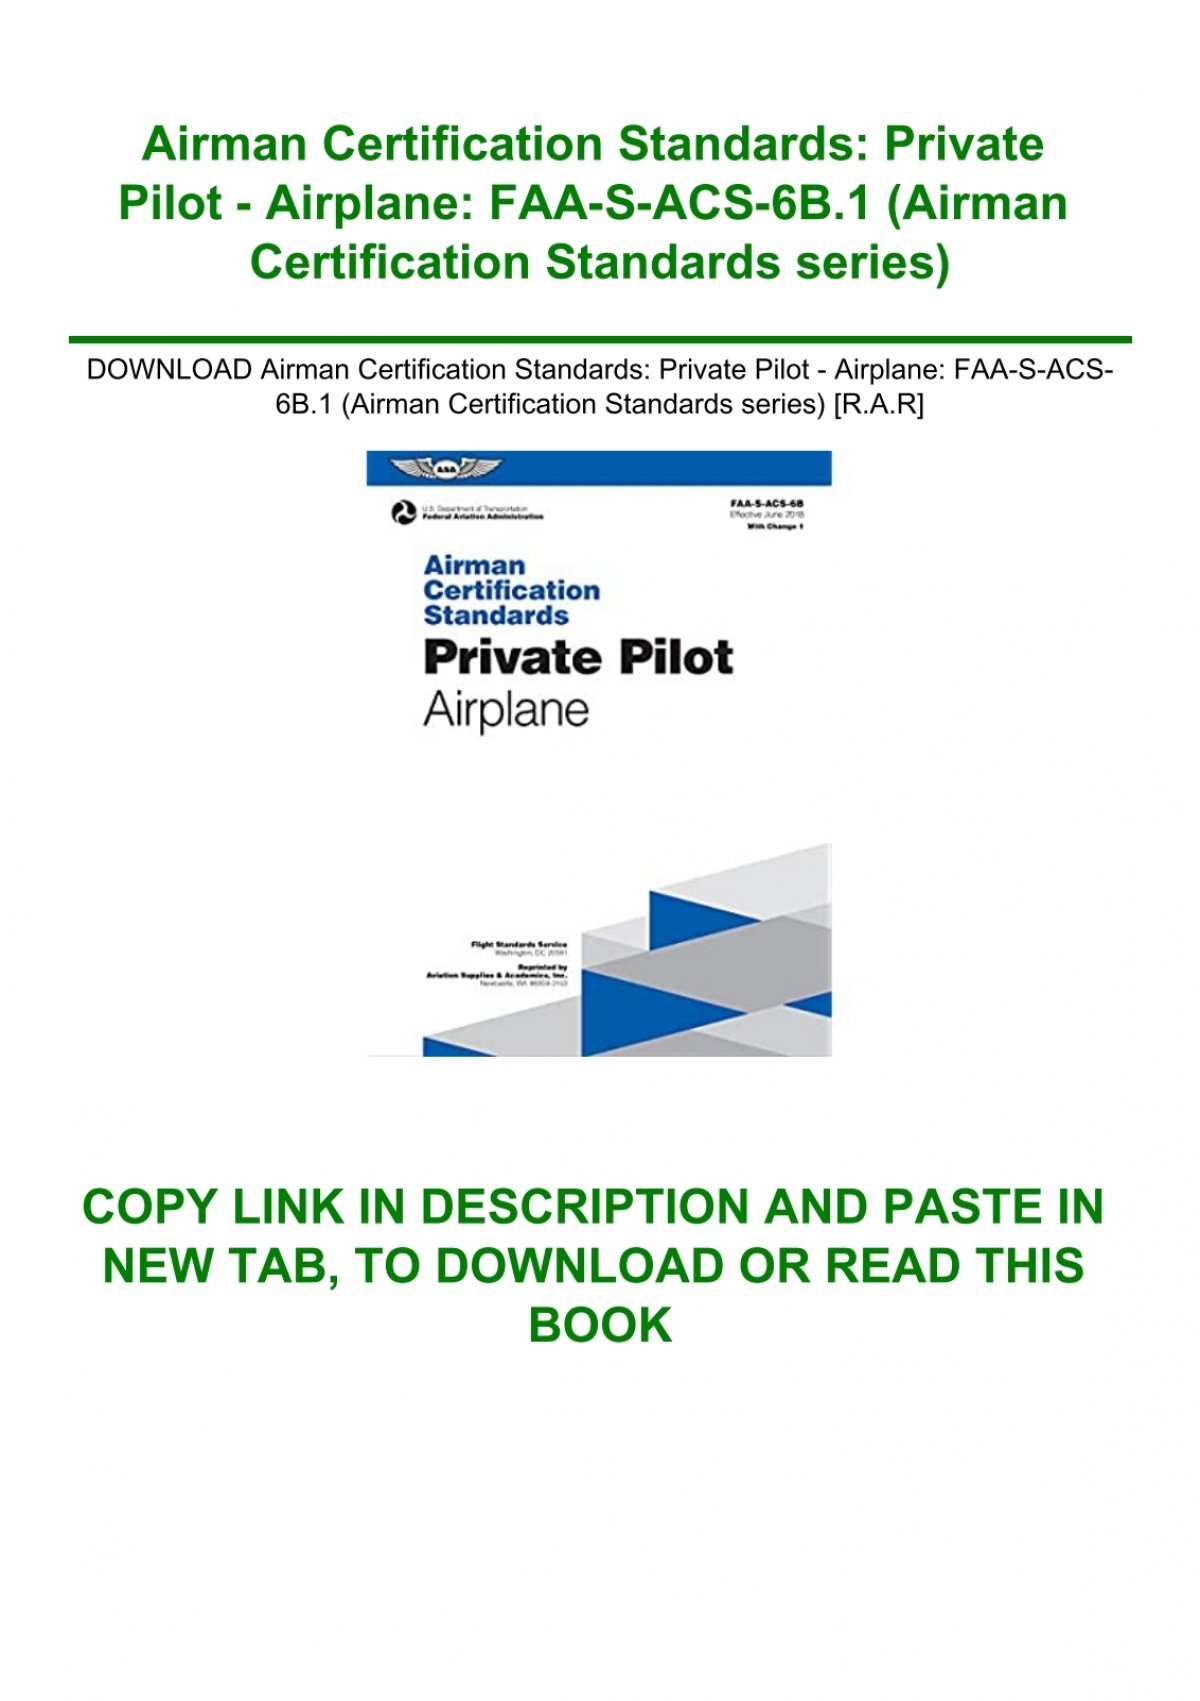 DOWNLOAD Airman Certification Standards Private Pilot Airplane FAA S